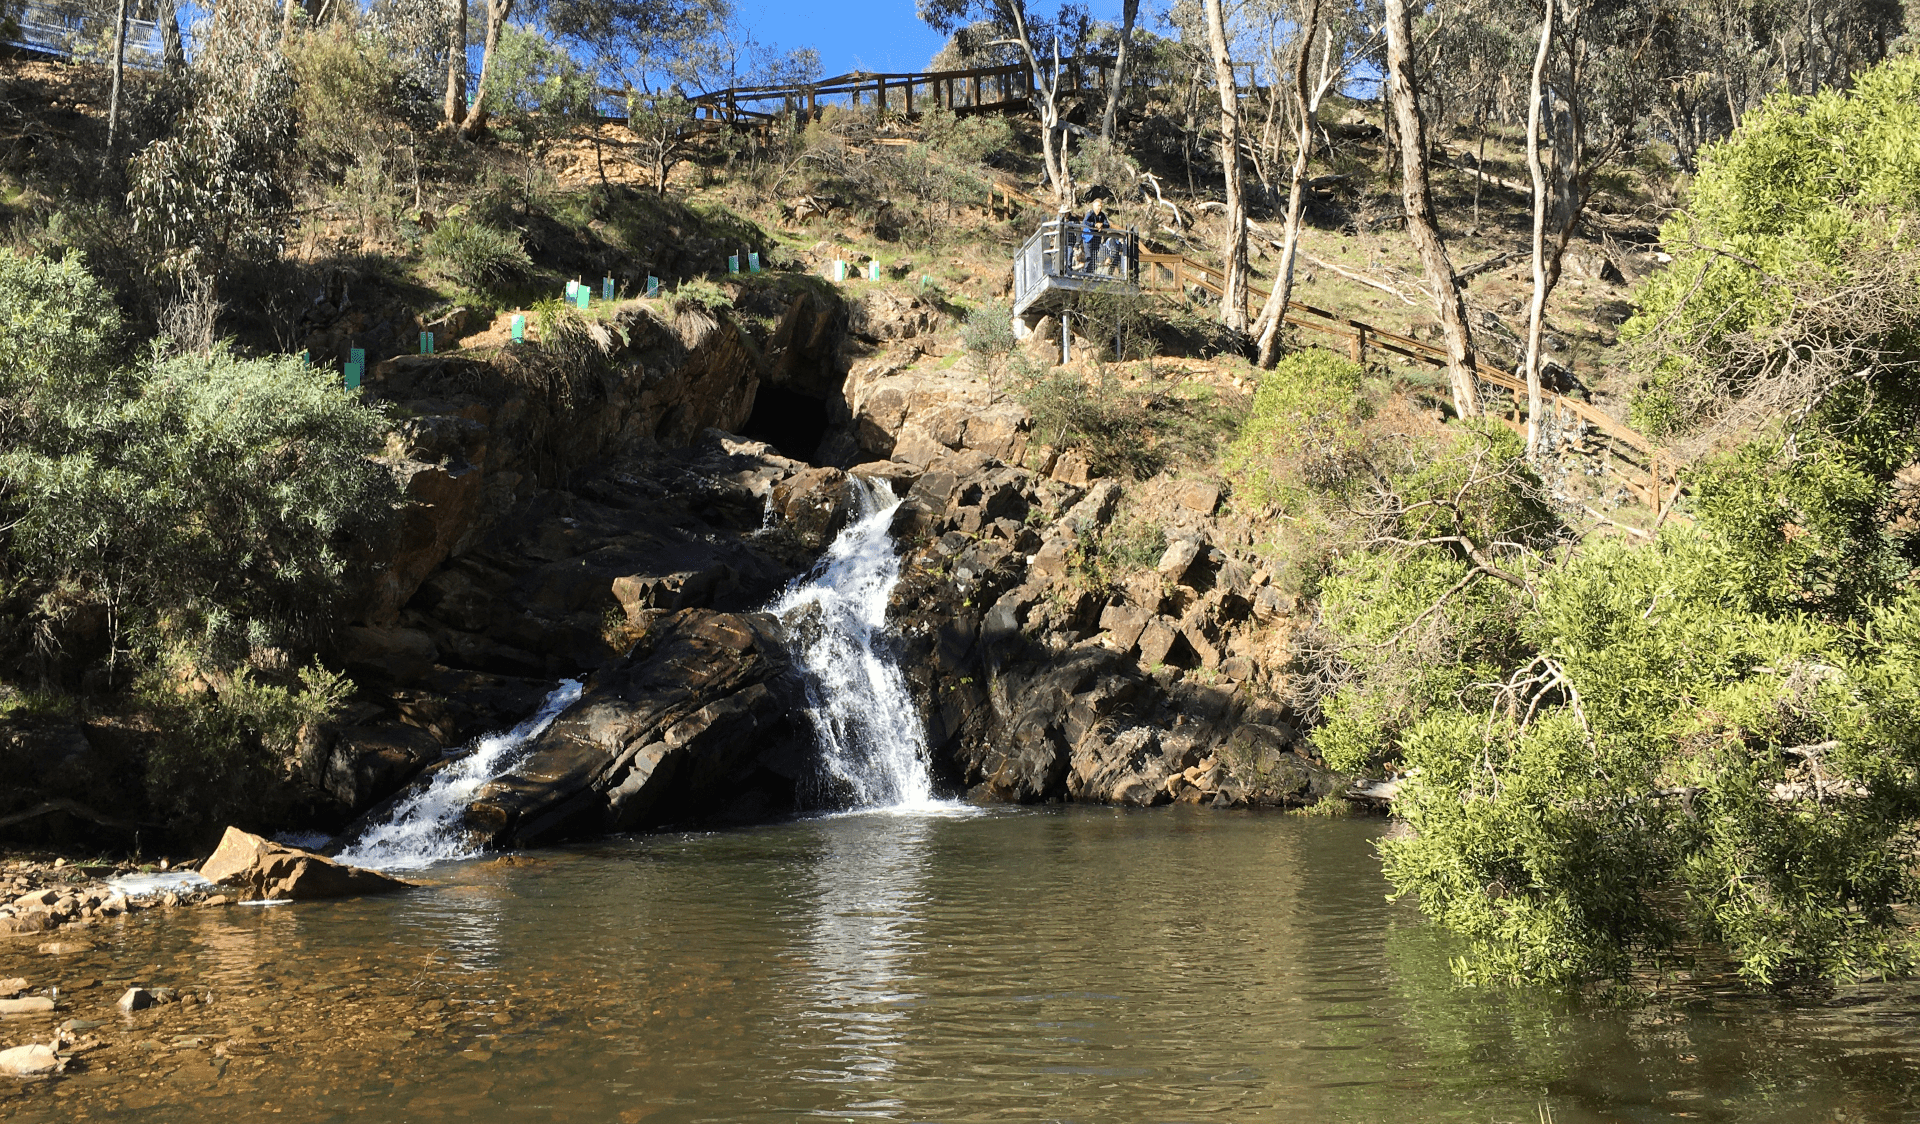 An amazing site after winter rains, The Blowhole in Hepburn Regional Park is a relic of the 1800's goldrush where miners diverted the original course of Sailors Creek